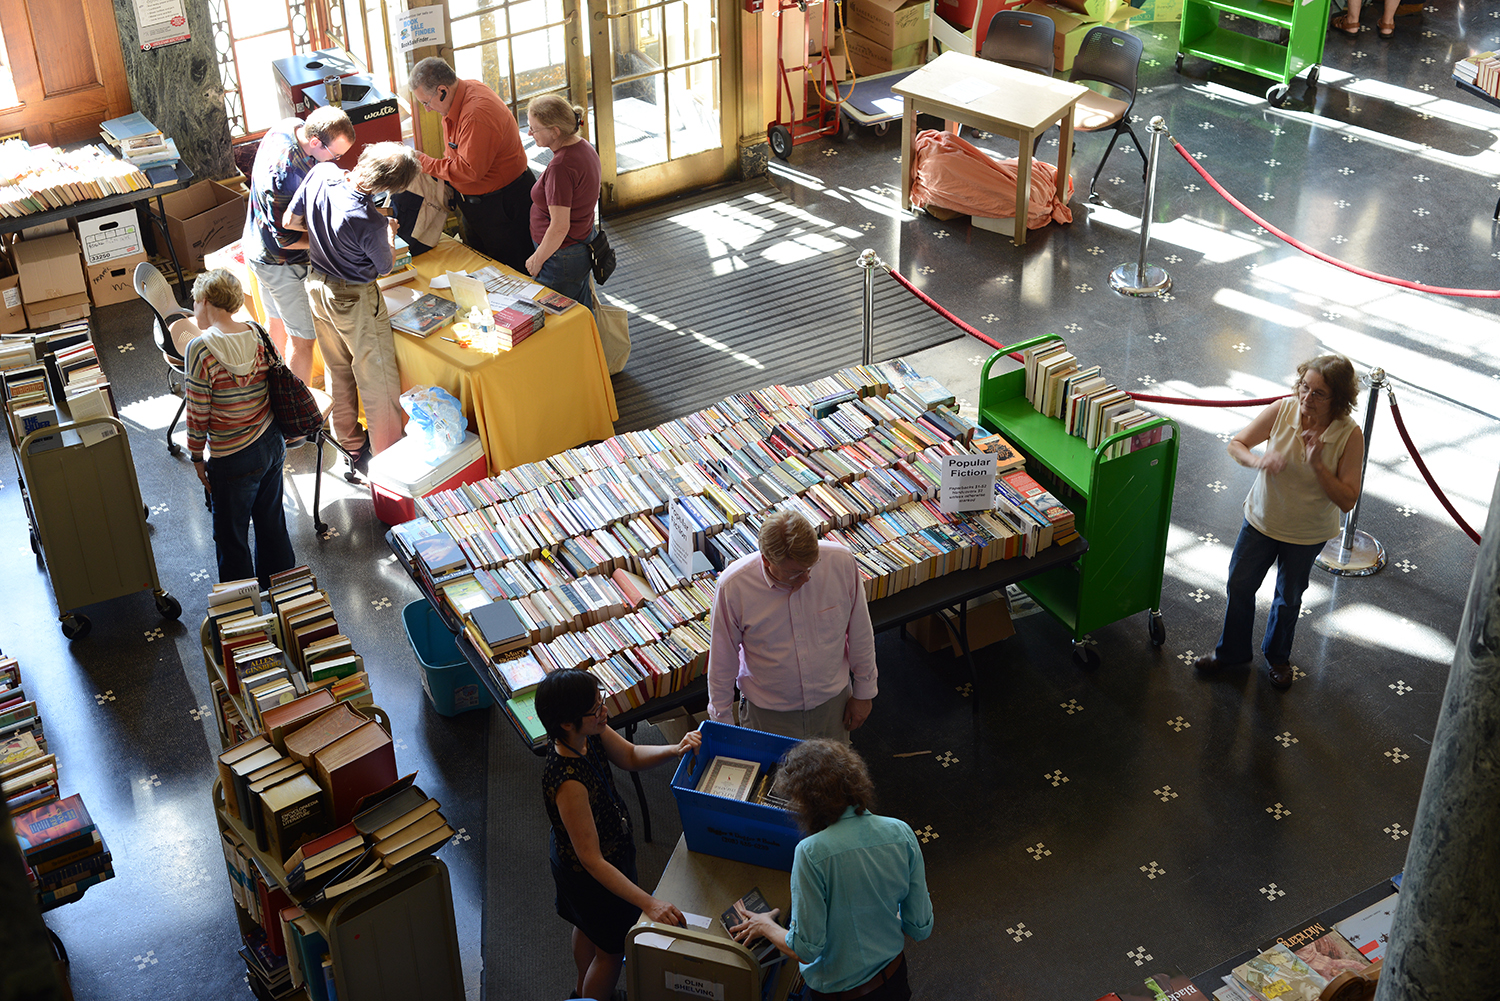 The book sale was open to Wesleyan students, faculty and staff, and the local community. 